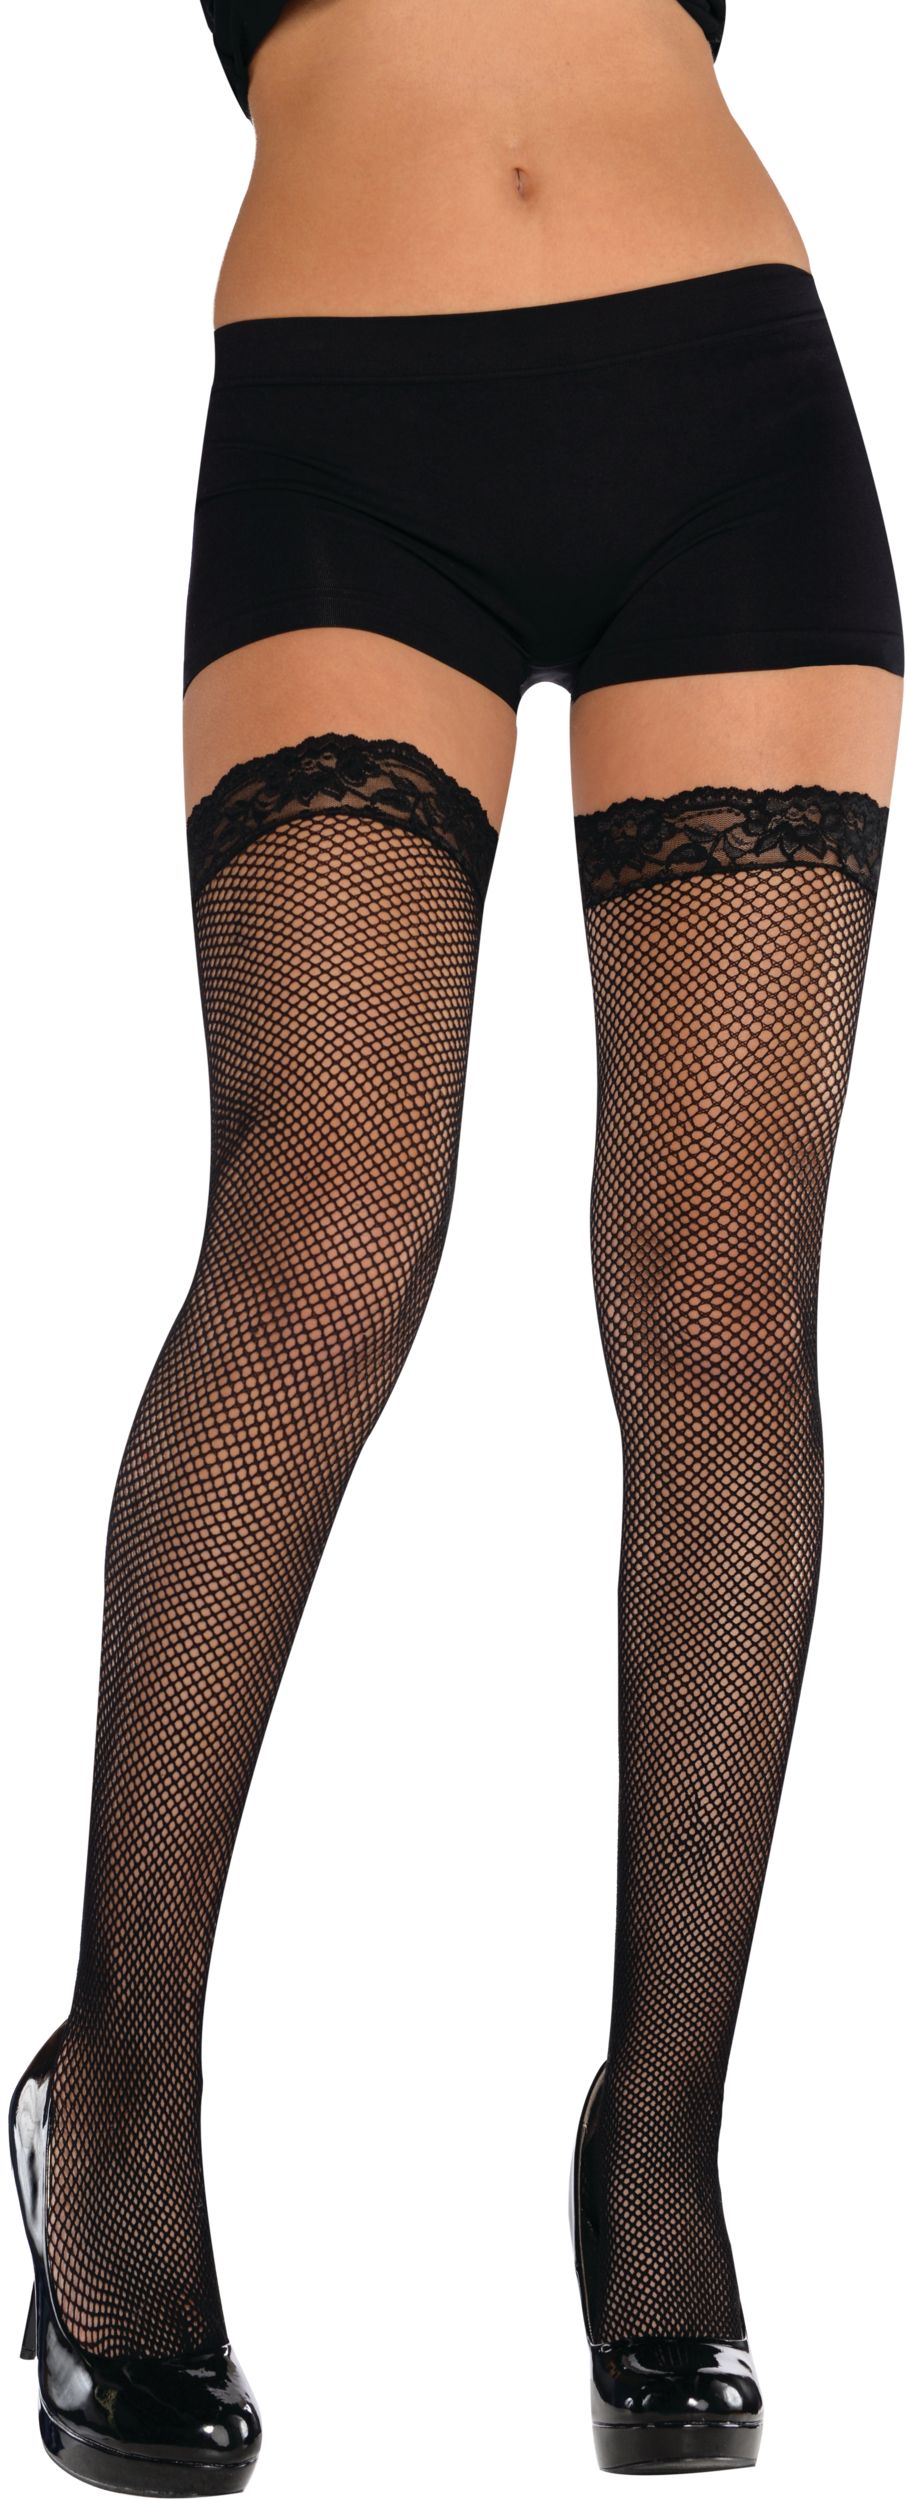 Adult Thigh-High Fishnet Stocking Tights with Lace, Black, One Size,  Wearable Costume Accessory for Halloween